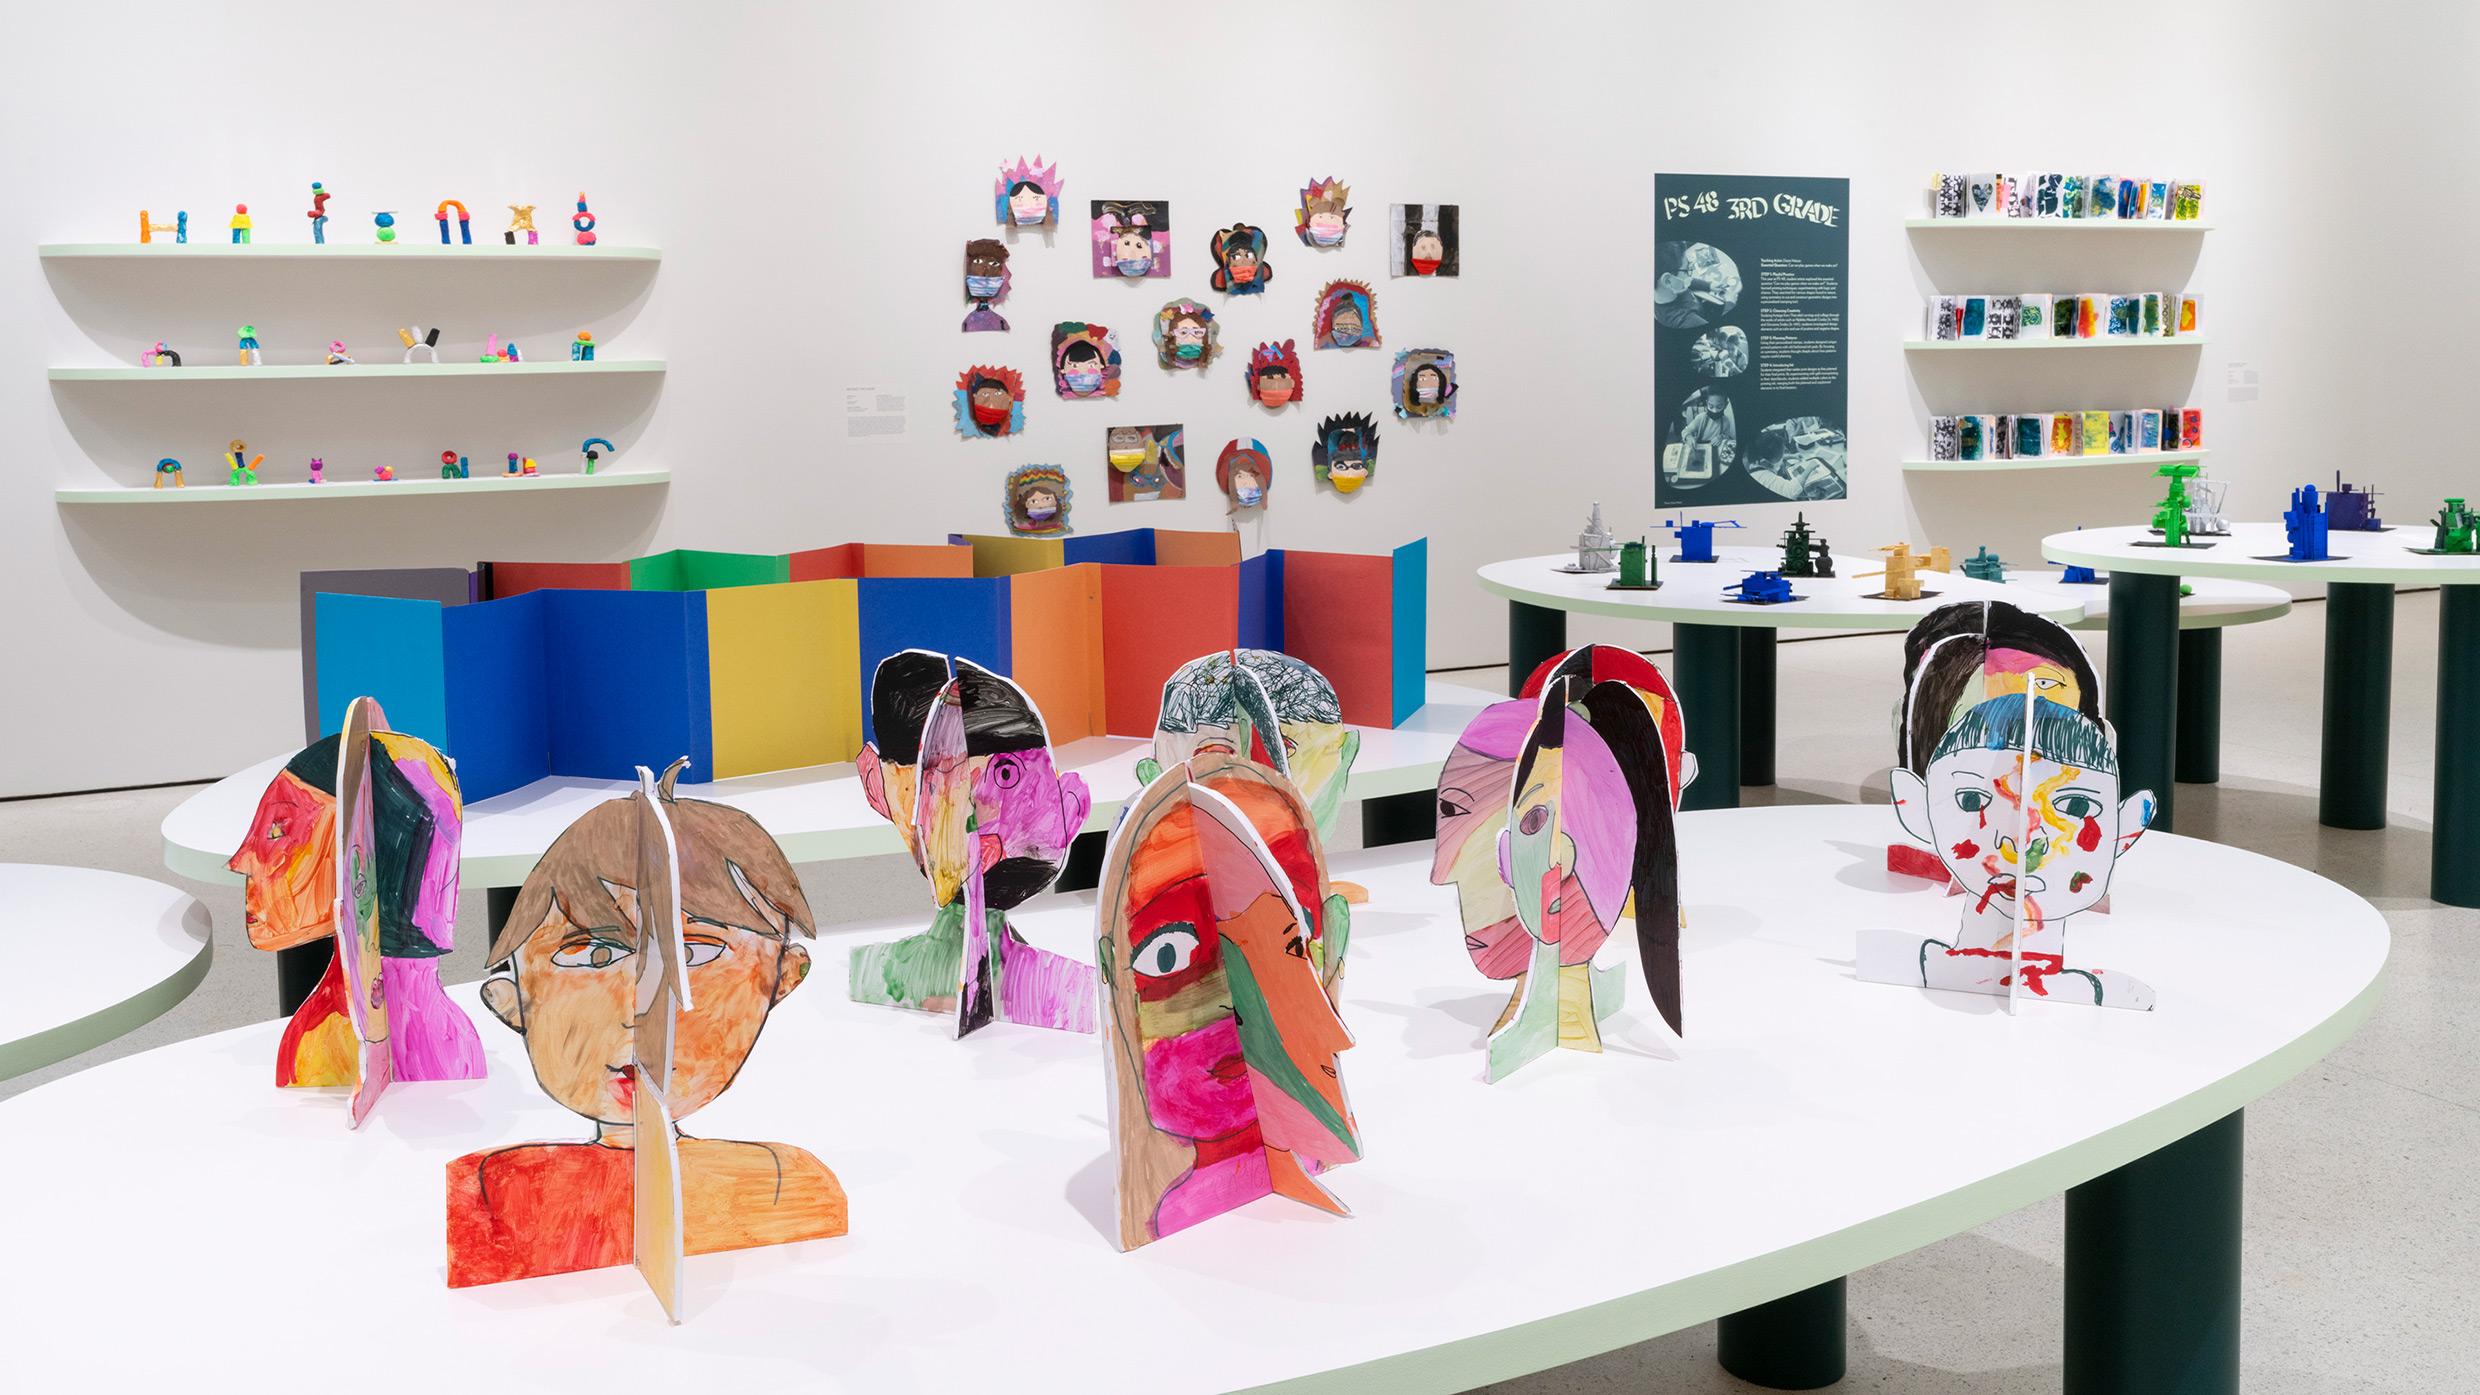 5 Reasons Cardboard Should Be an Essential Art Room Material - The Art of  Education University